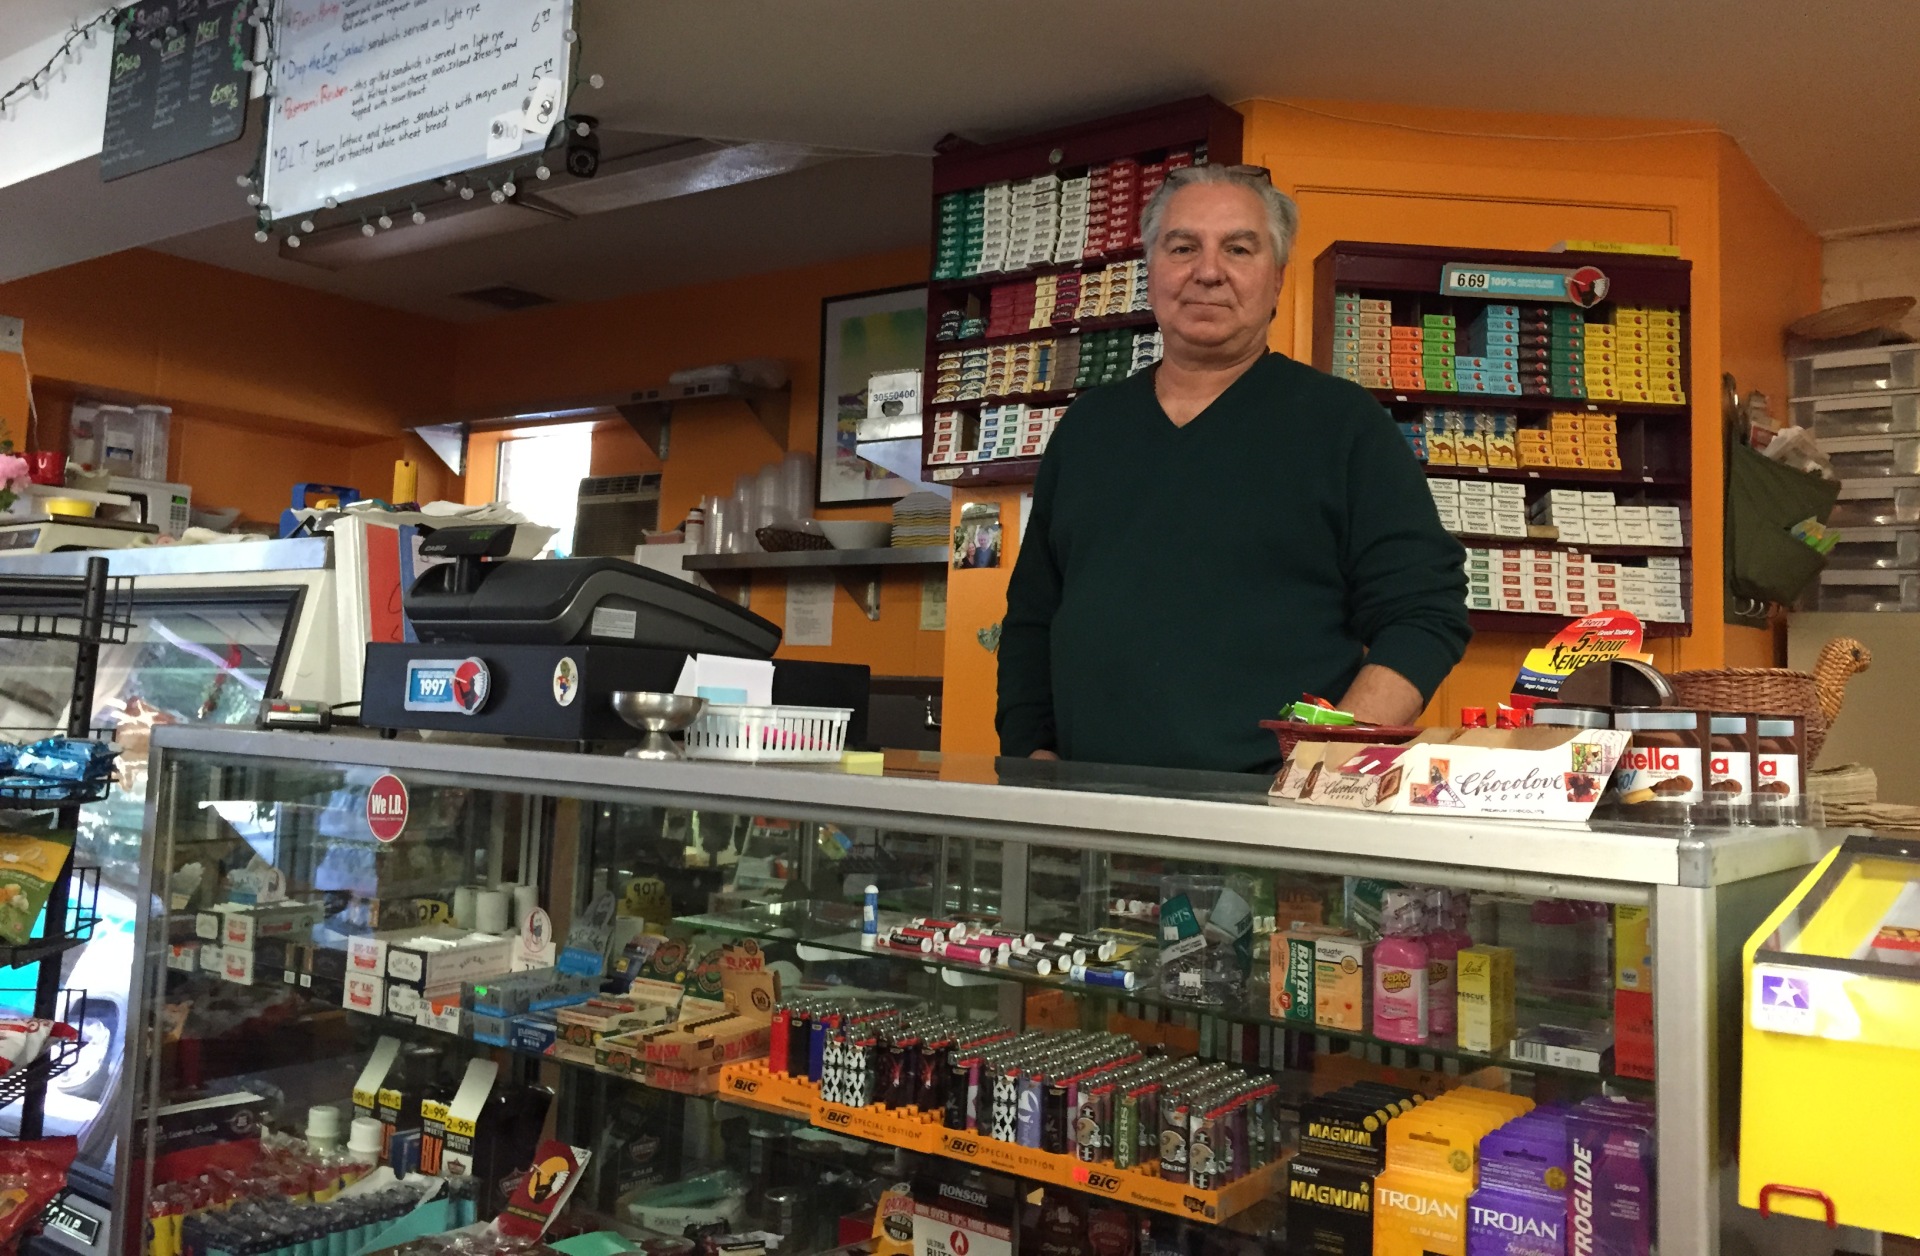 Dean Nicolaides stands at the counter of Dino's Loch Lomond Market on Sept. 29, 2015. The store had yet to reopen following the Valley Fire that destroyed Nicolaides' home along with about 1,300 others.